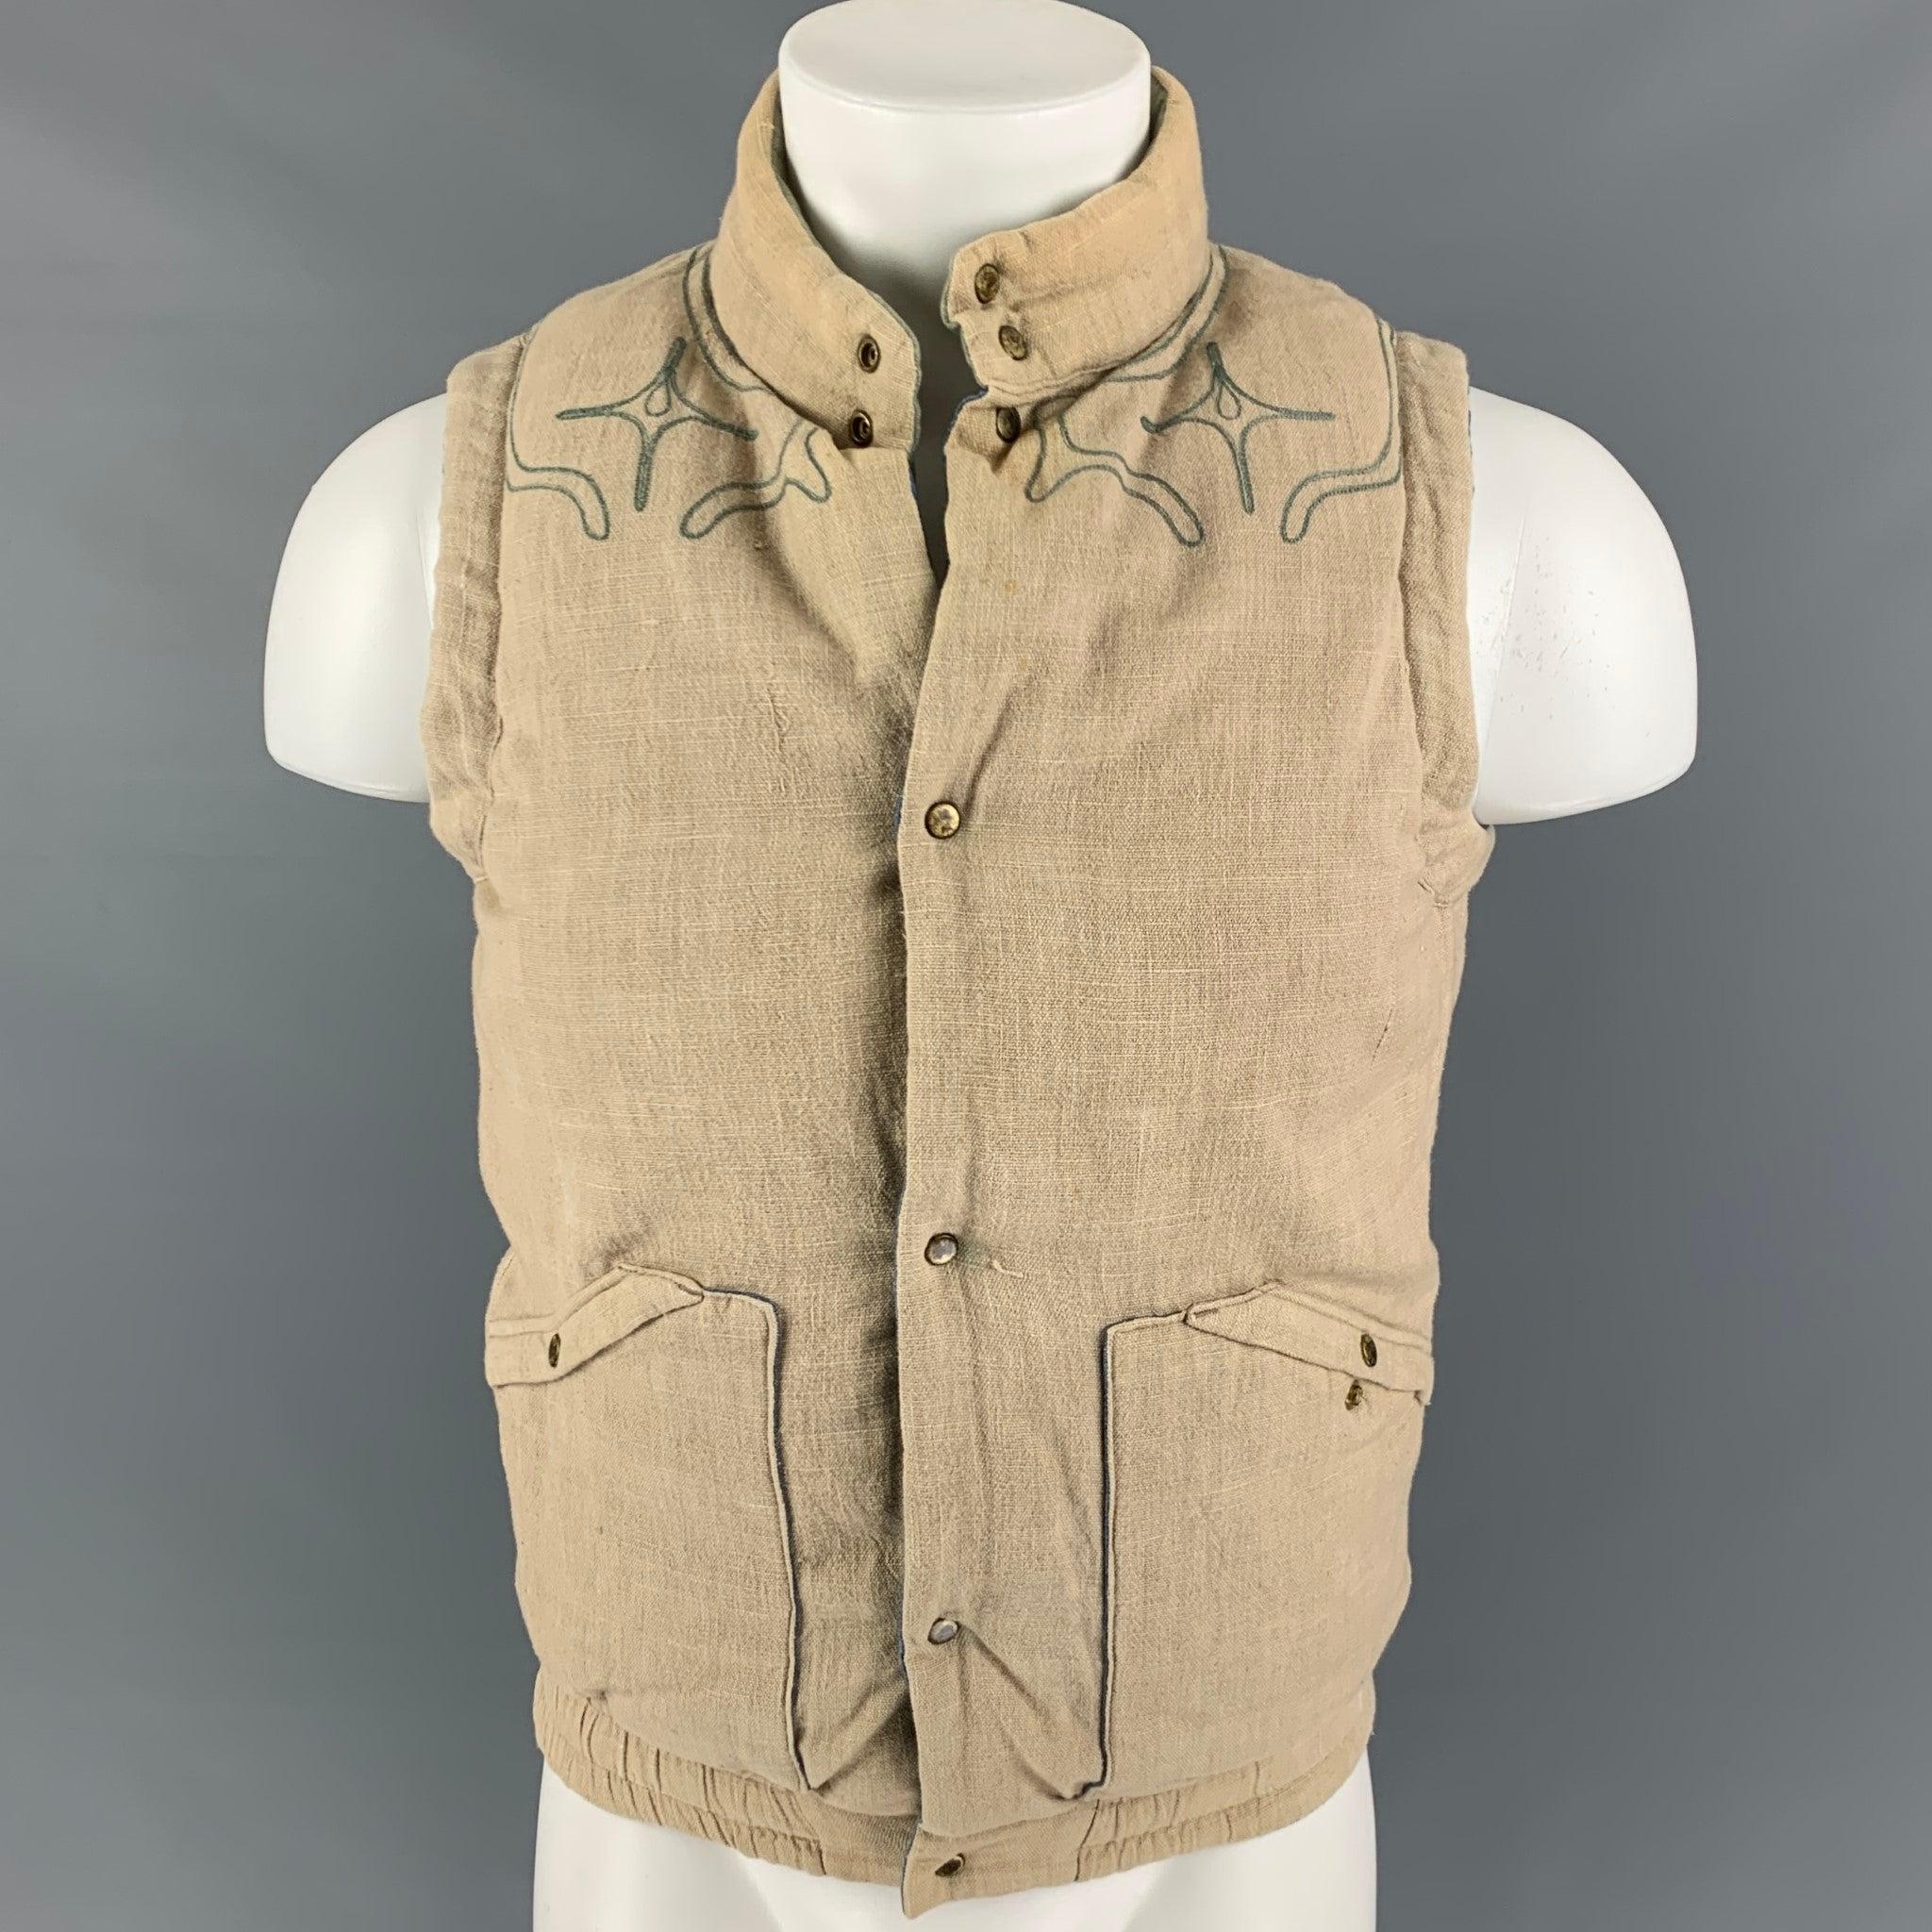 VISVIM vest comes in a multi-color padded cotton / linen featuring a reversible style, embroidered design, front pockets, elastic trim, and a snap button closure. Made in Japan.Very Good
Pre-Owned Condition. Minor discoloration. As-is.  

Marked:  